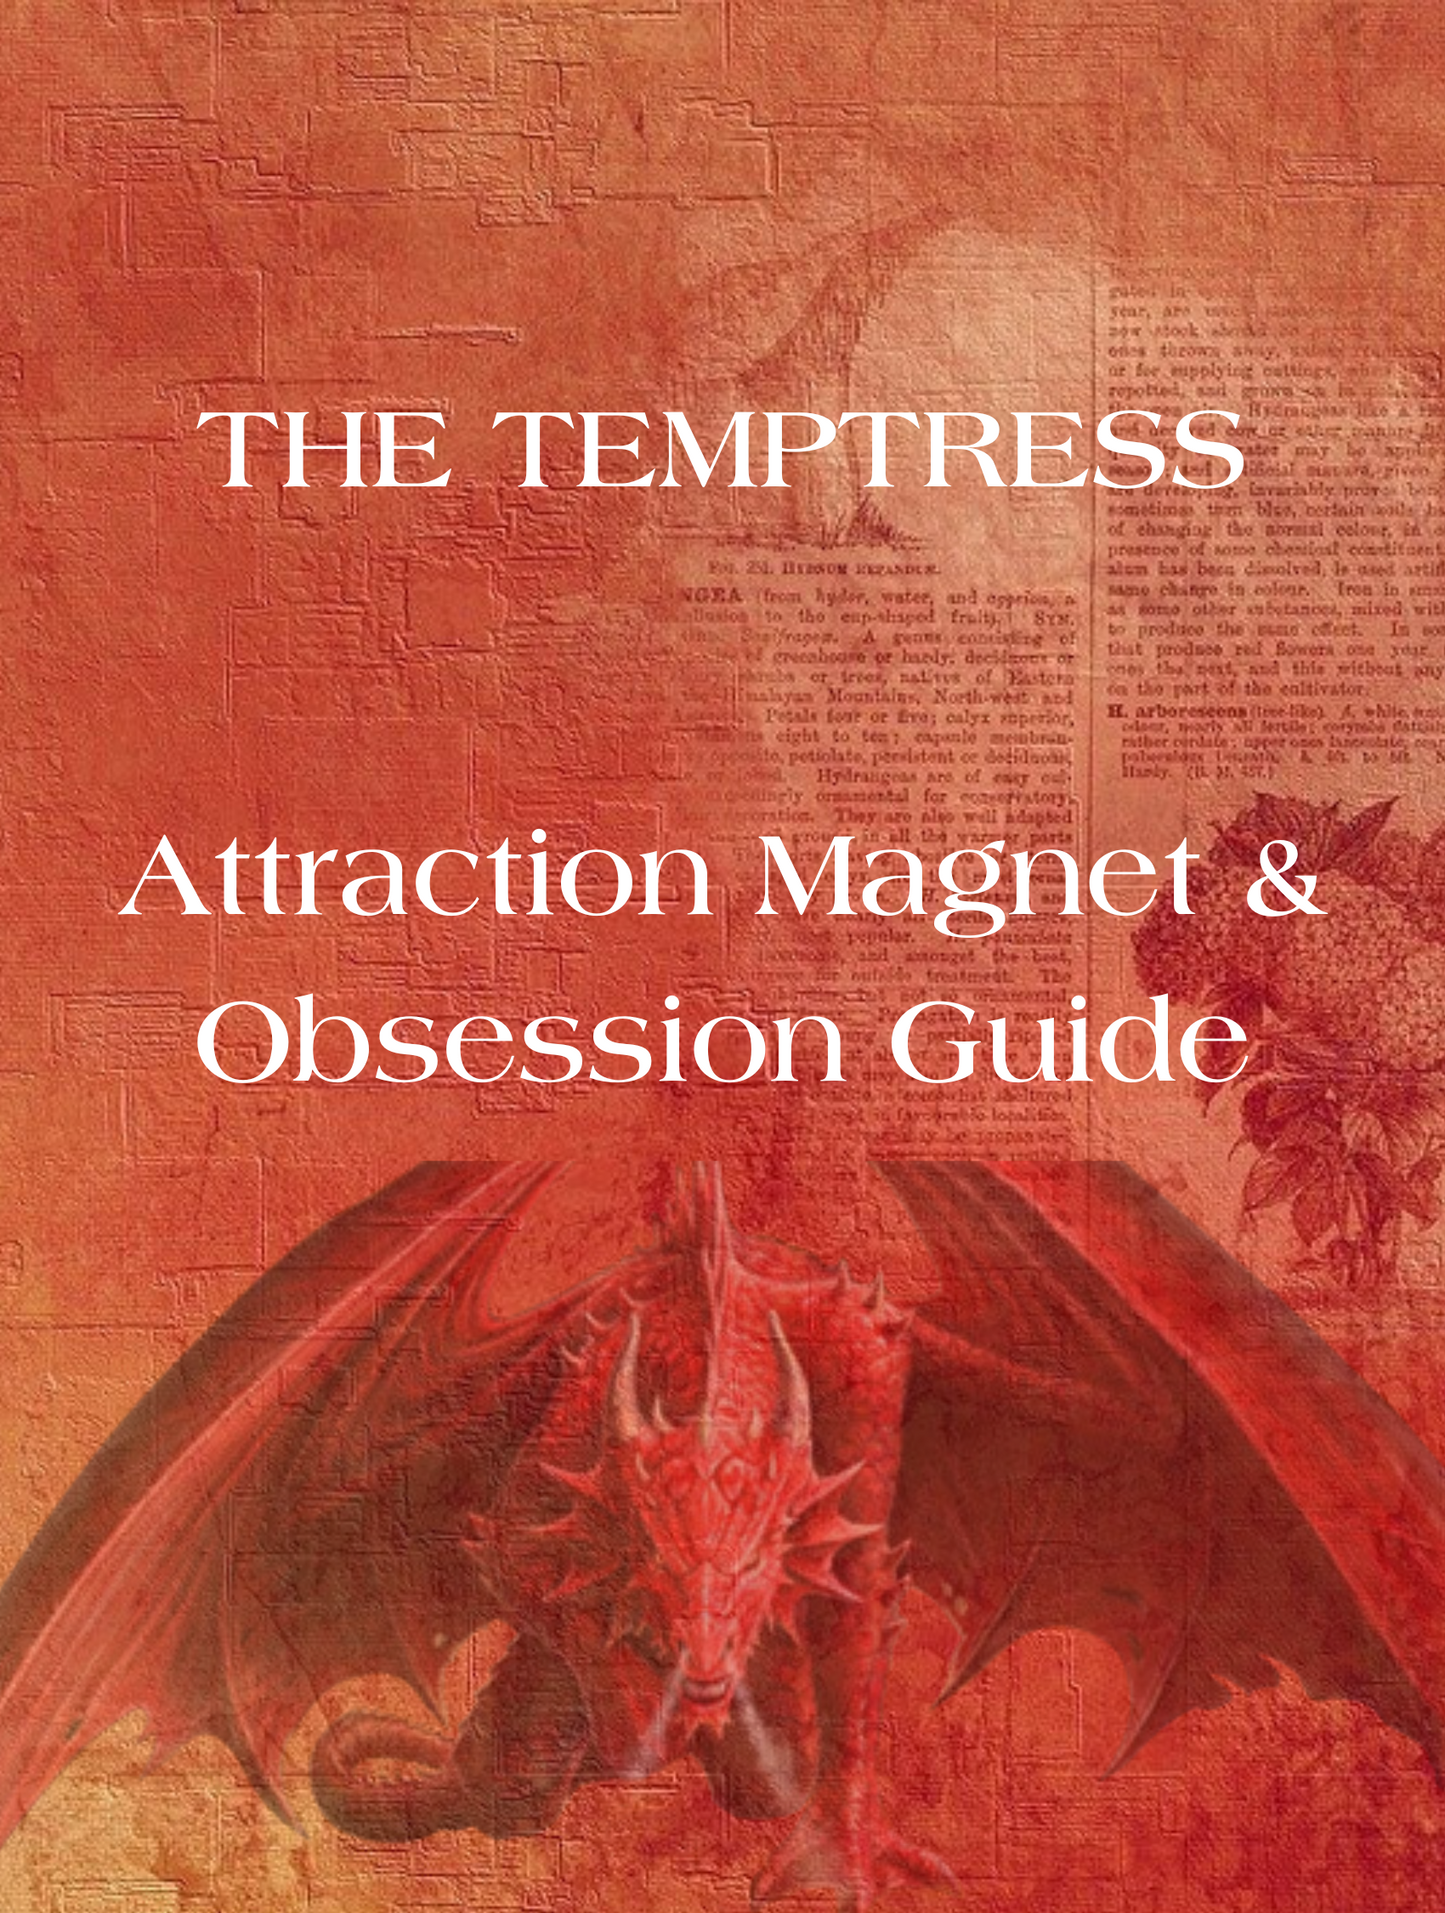 THE TEMPTRESS; Attraction Magnet & Obsession Guide